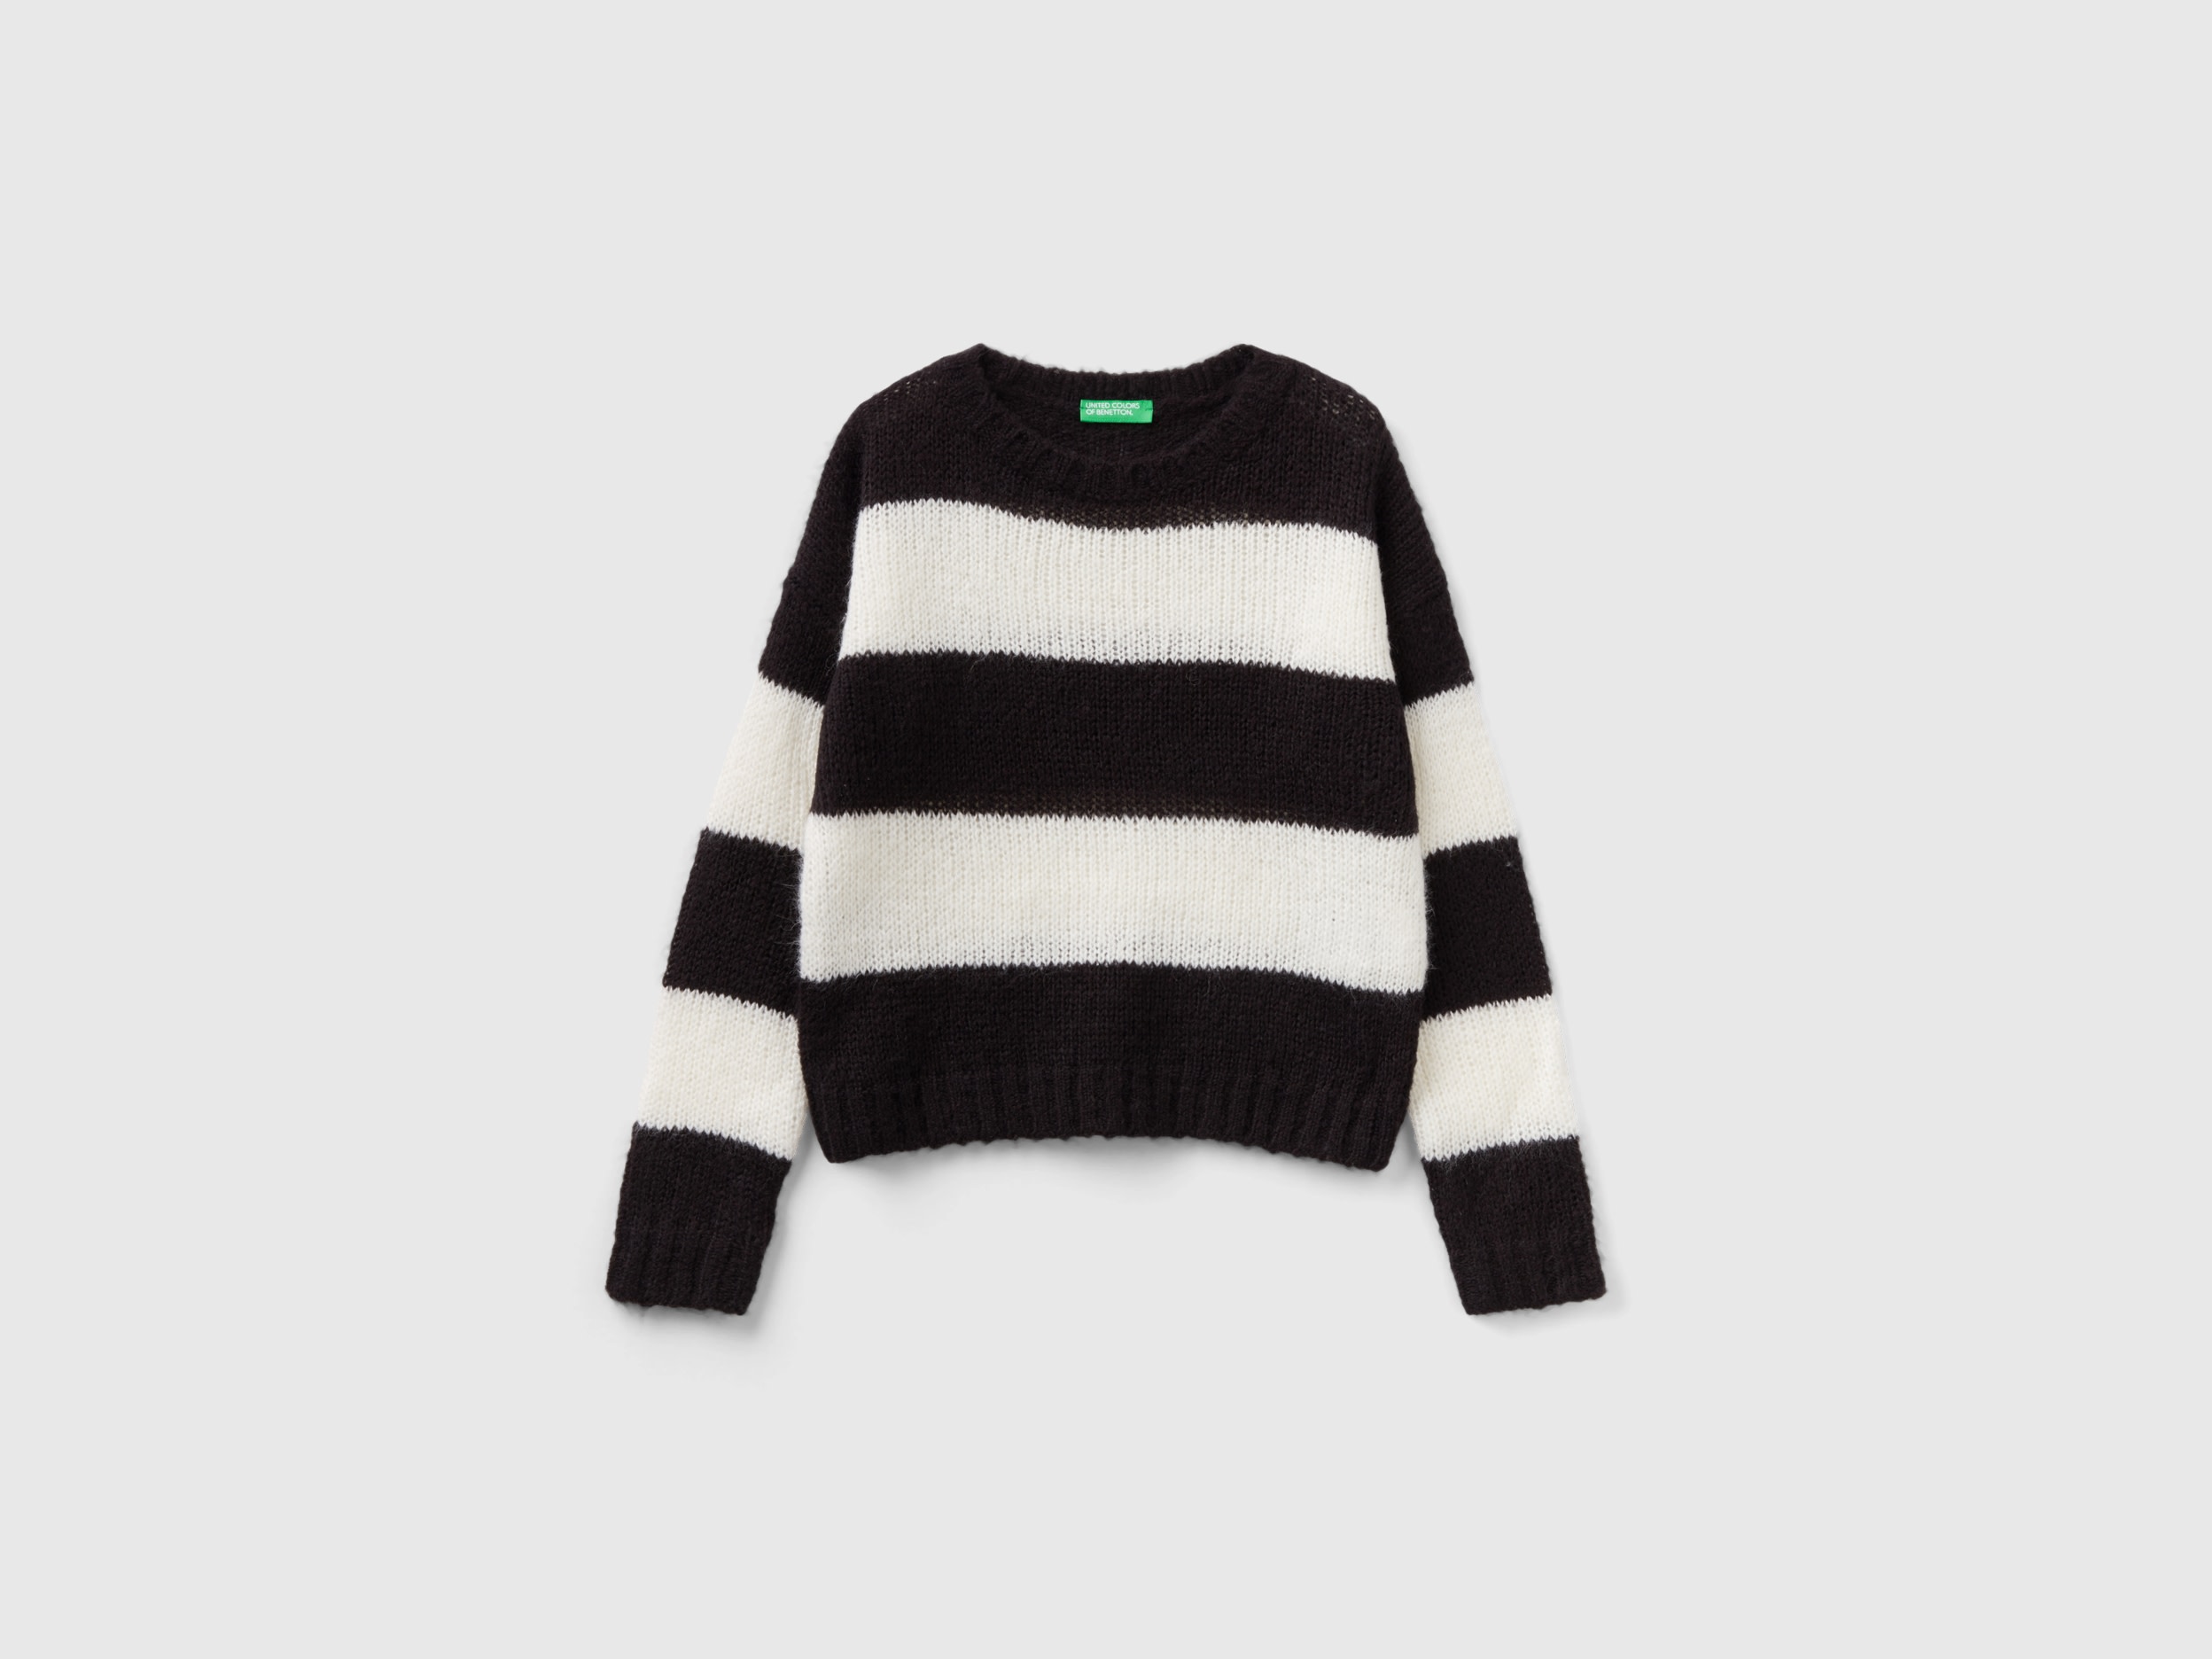 Benetton, Sweater With Two-tone Stripes, size M, Black, Kids